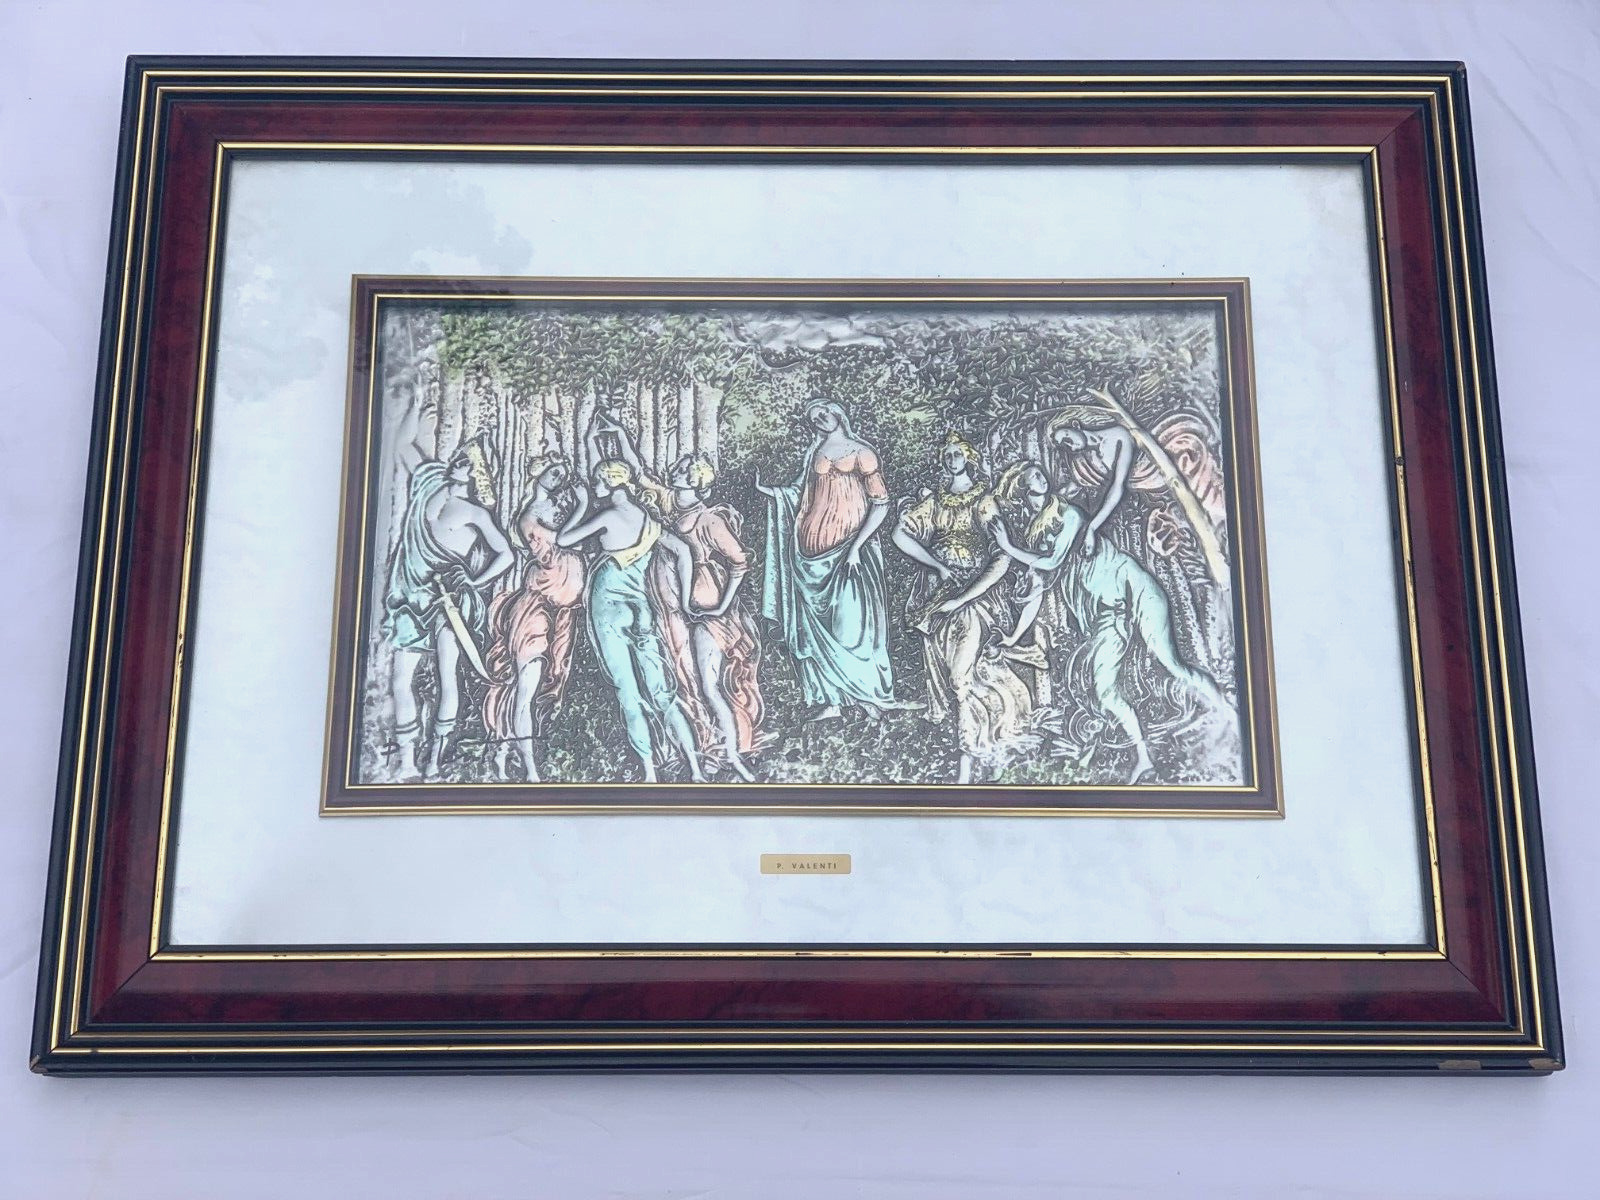 P. VALENTI EMBOSSED SILVER PLAQUE ART NOUVEAU CLASSICAL FIGURES IN FOREST ITALY